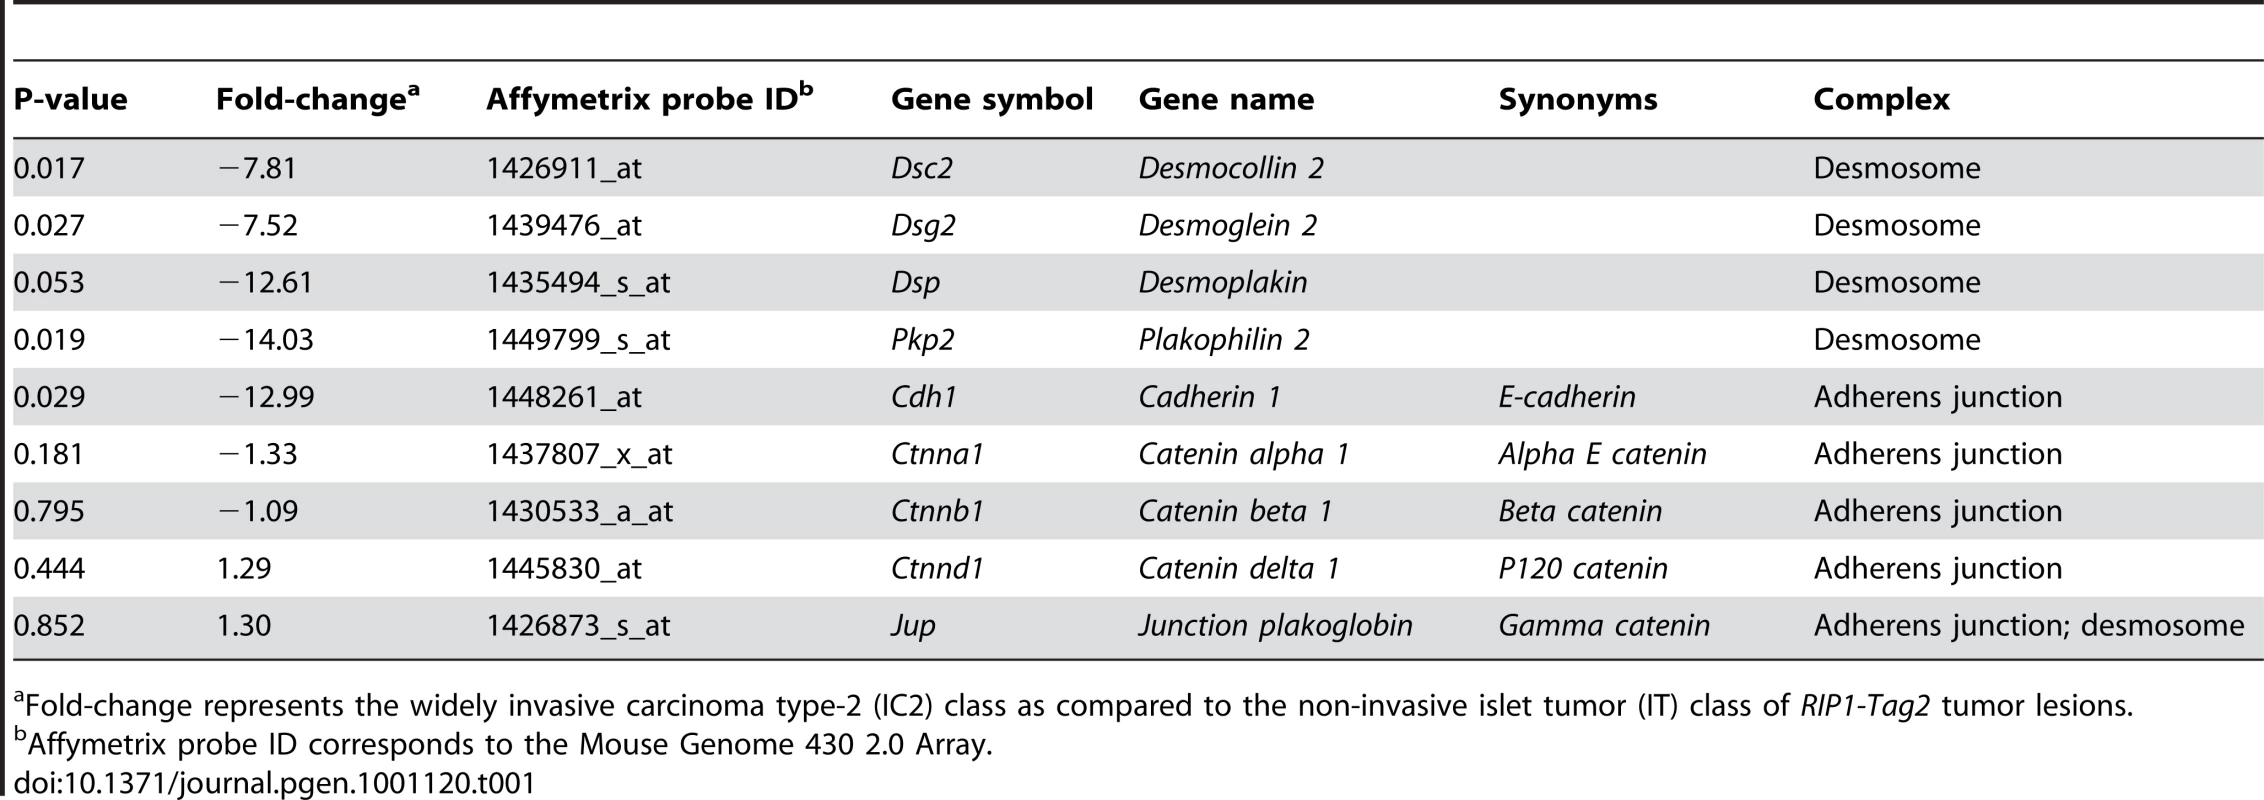 Summary of Microarray Results for Components of Desmosomes and Adherens Junctions.